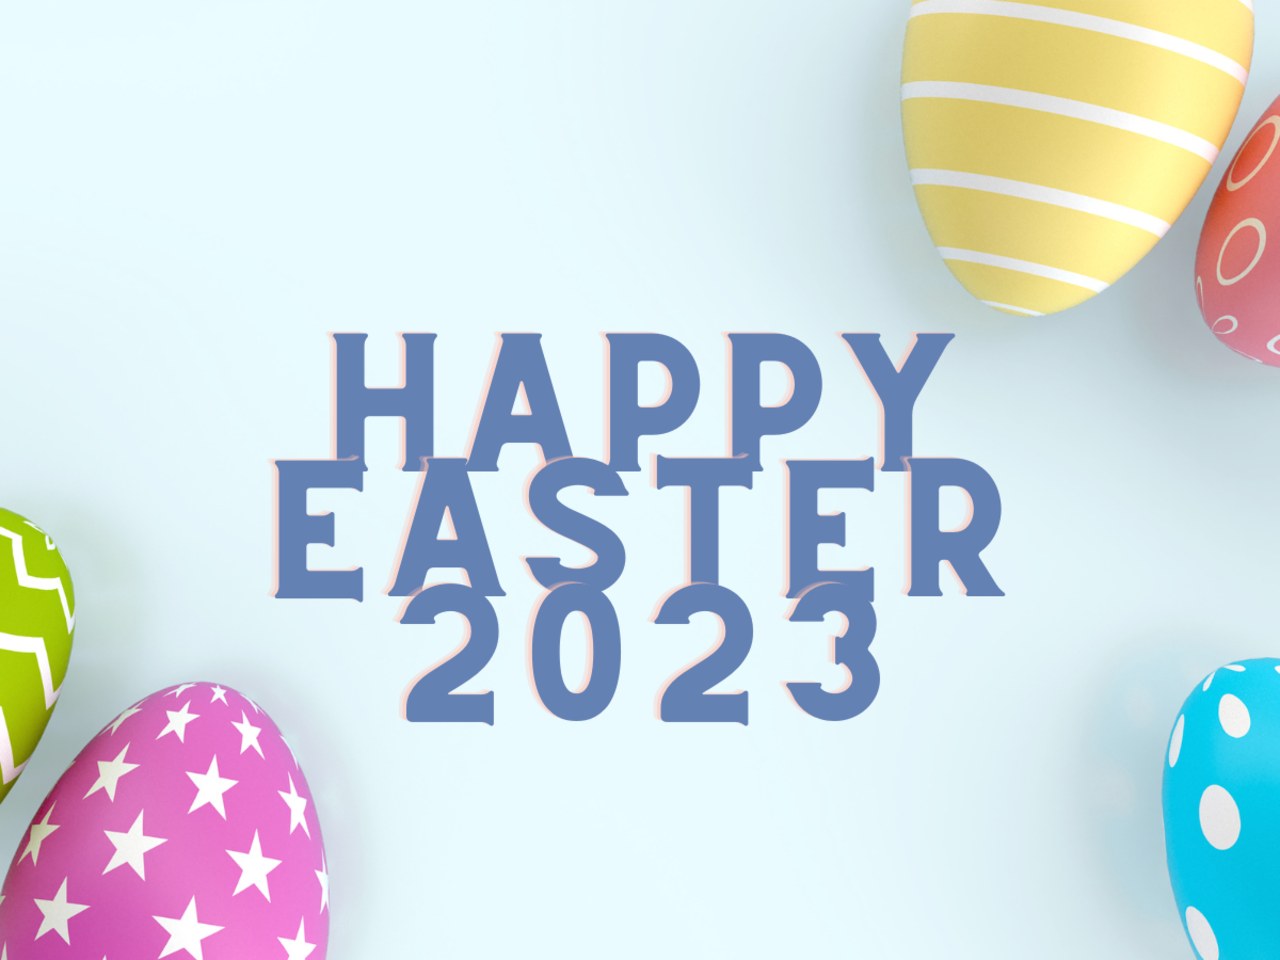 Easter Wishes & Messages: Happy Easter Sunday 2023: Best Messages, Quotes, Wishes and Images to share on Easter Sunday